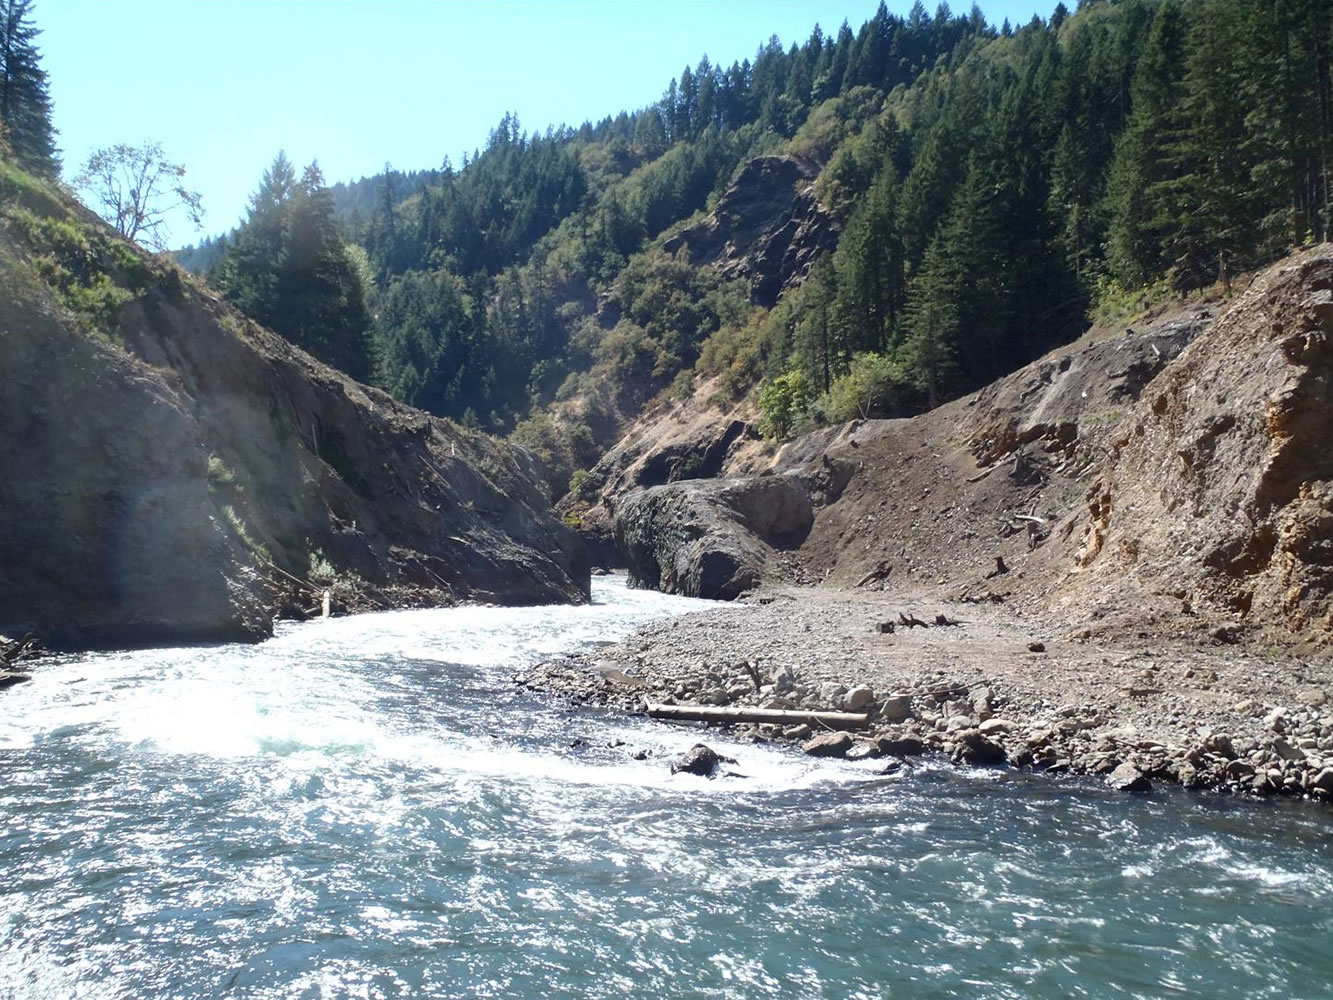 The former location of Condit Dam on the White Salmon River, shown earlier this year.